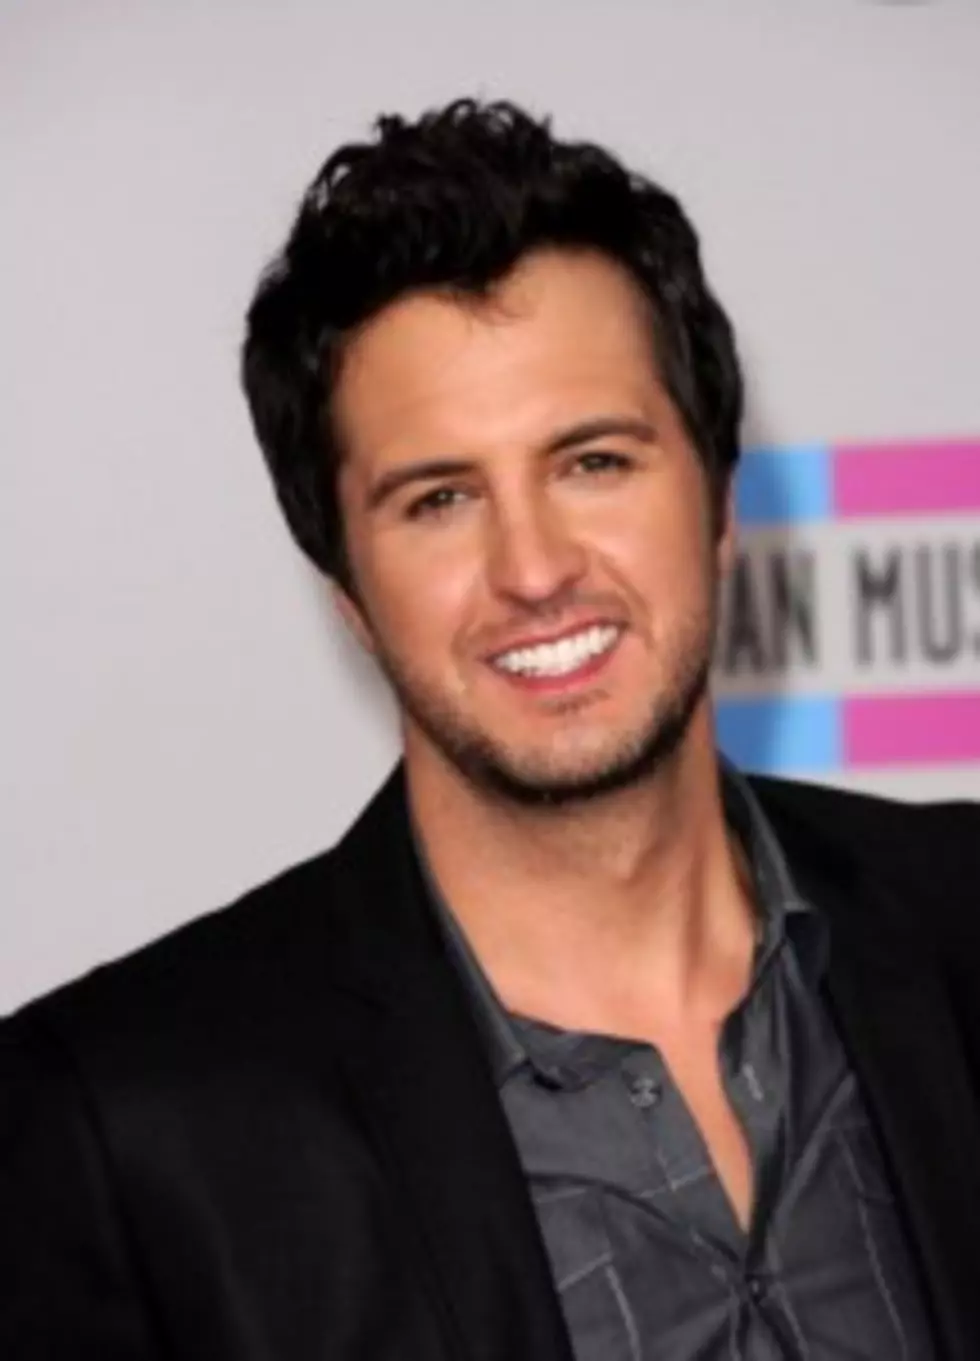 Luke Bryan Spoke With Clay And Dale